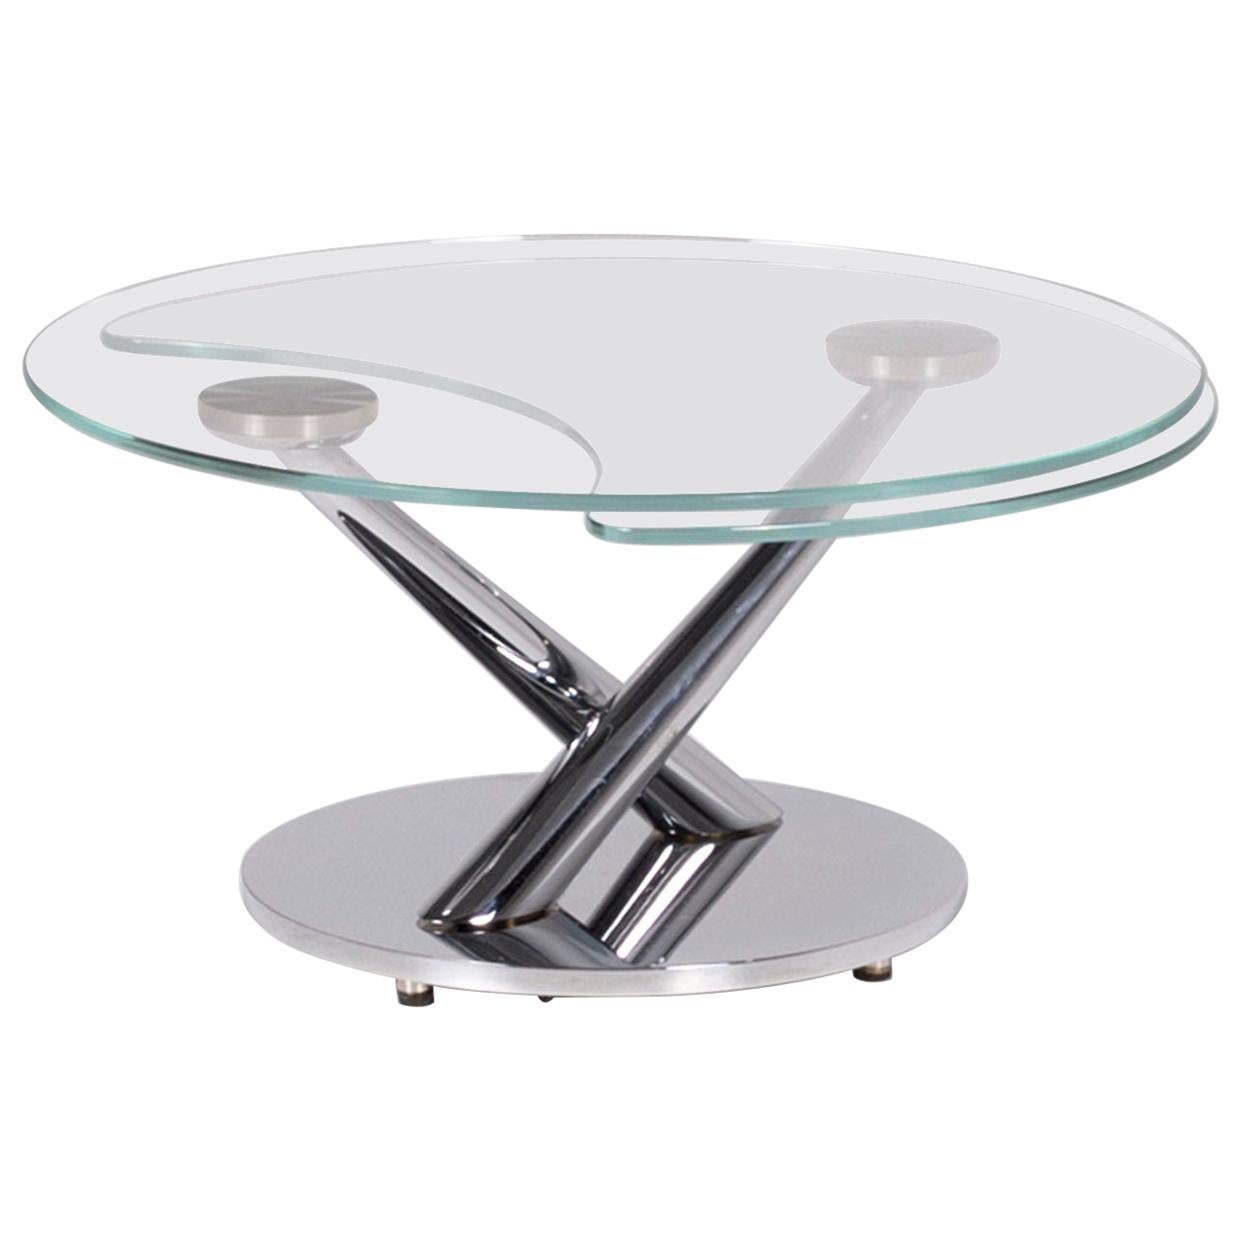 NAOS glass coffee table round movable function table